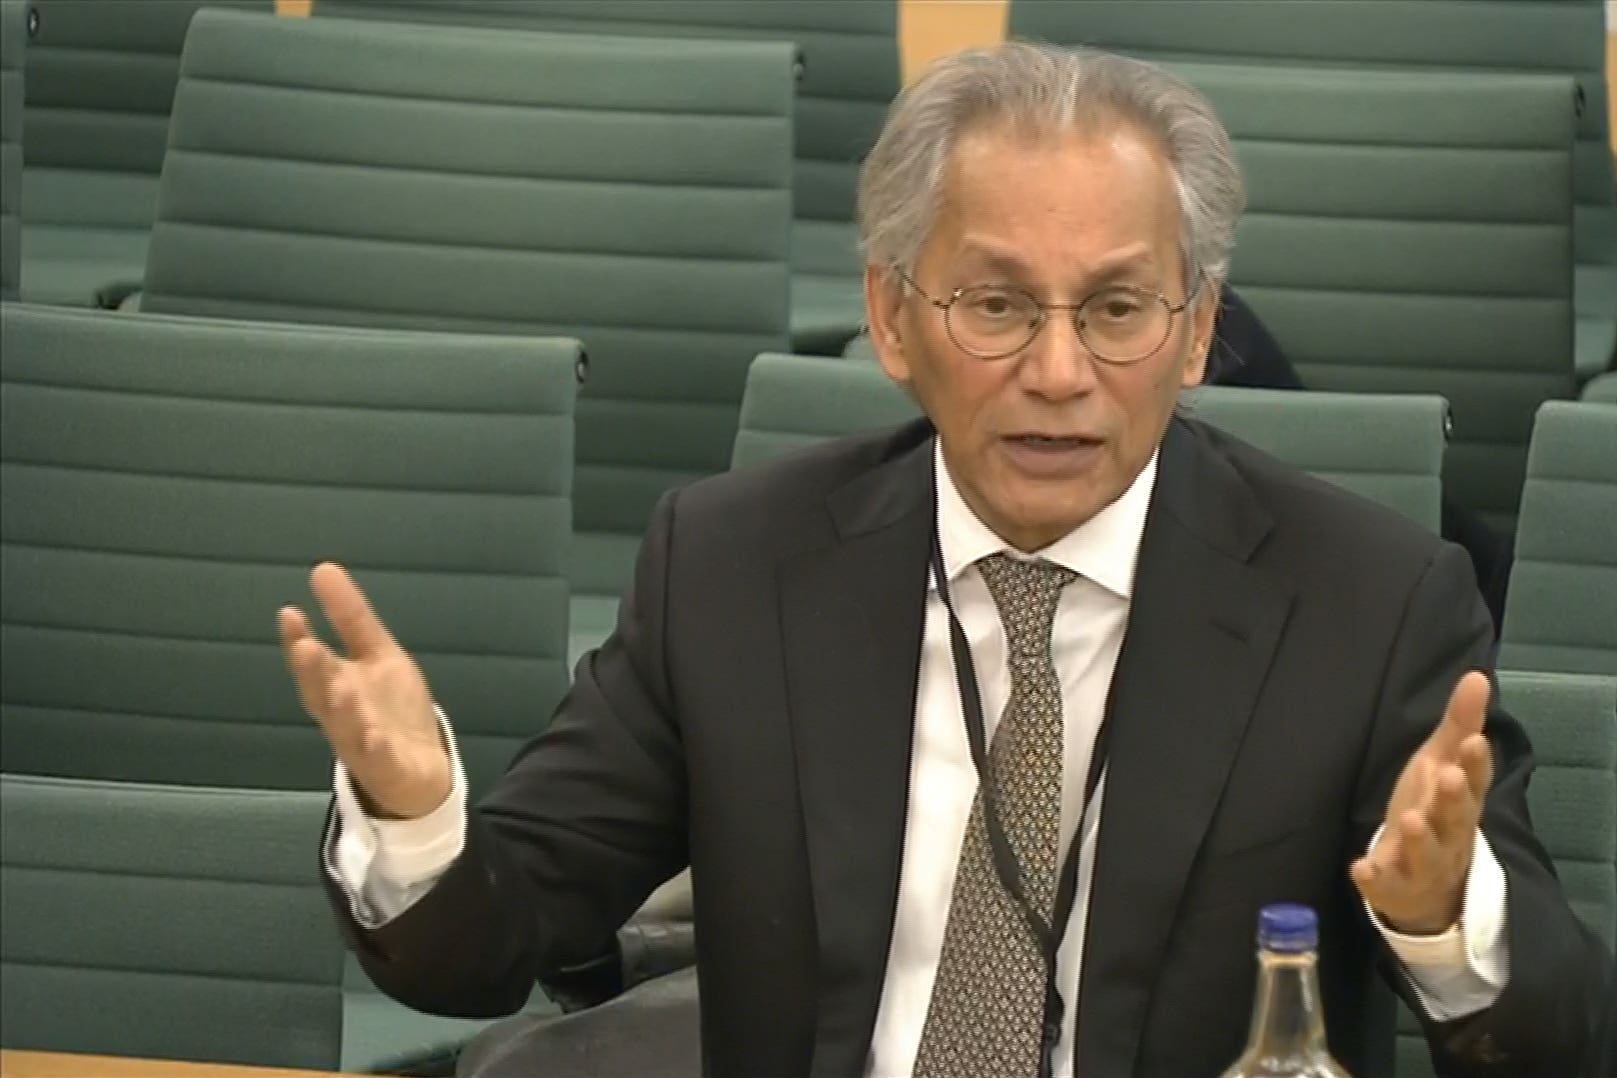 Screengrab of Samir Shah at the Culture, Media and Sport Committee pre-appointment hearing (House of Commons/PA)